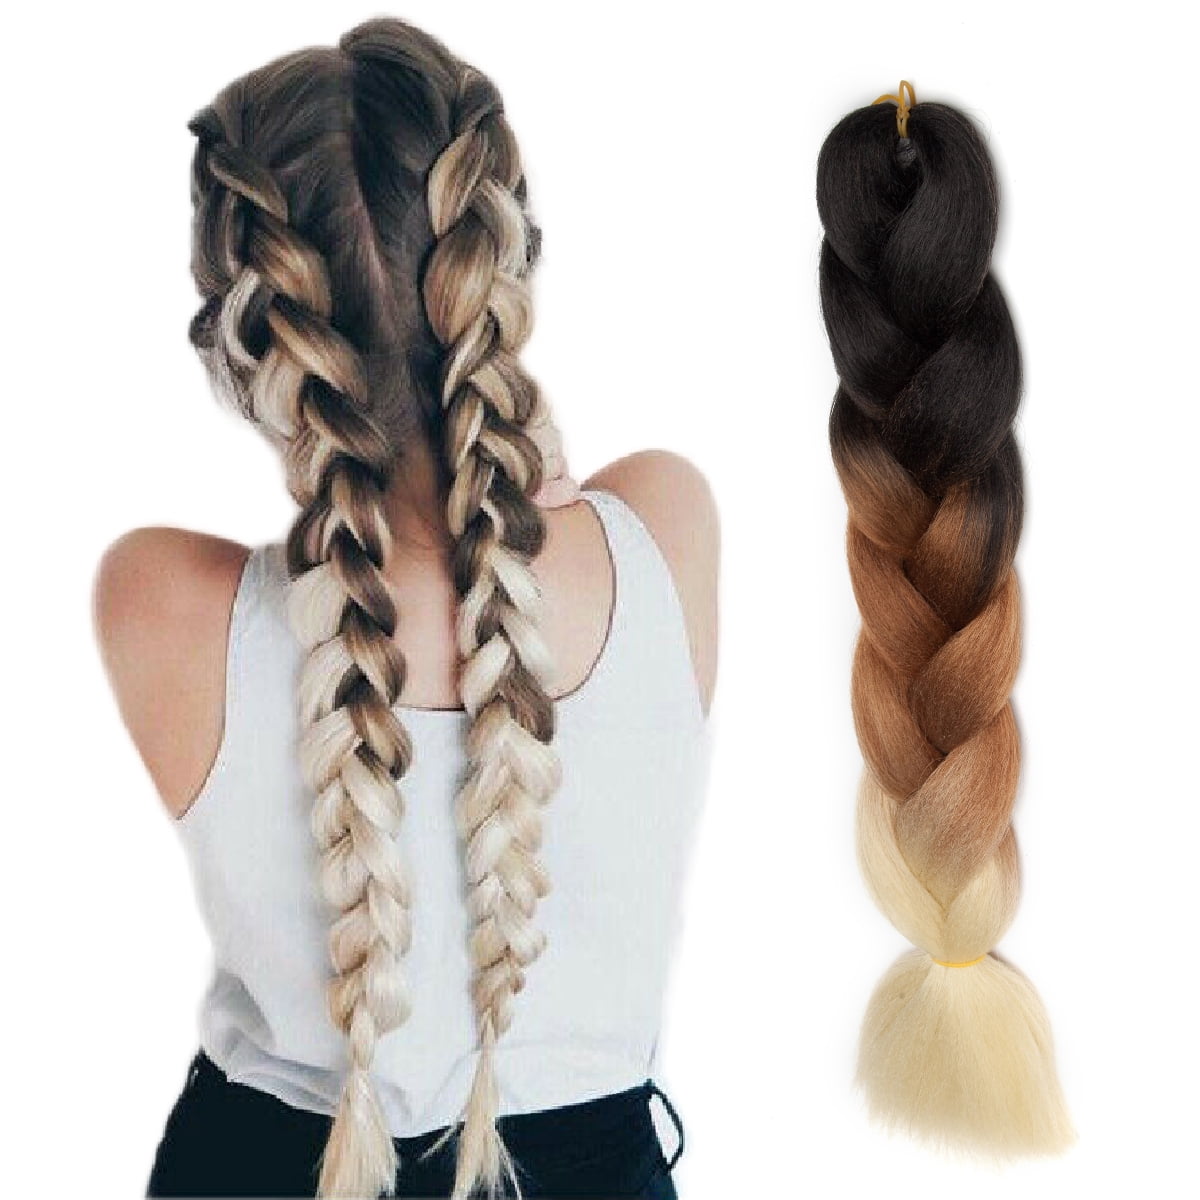 hair extensions with braids